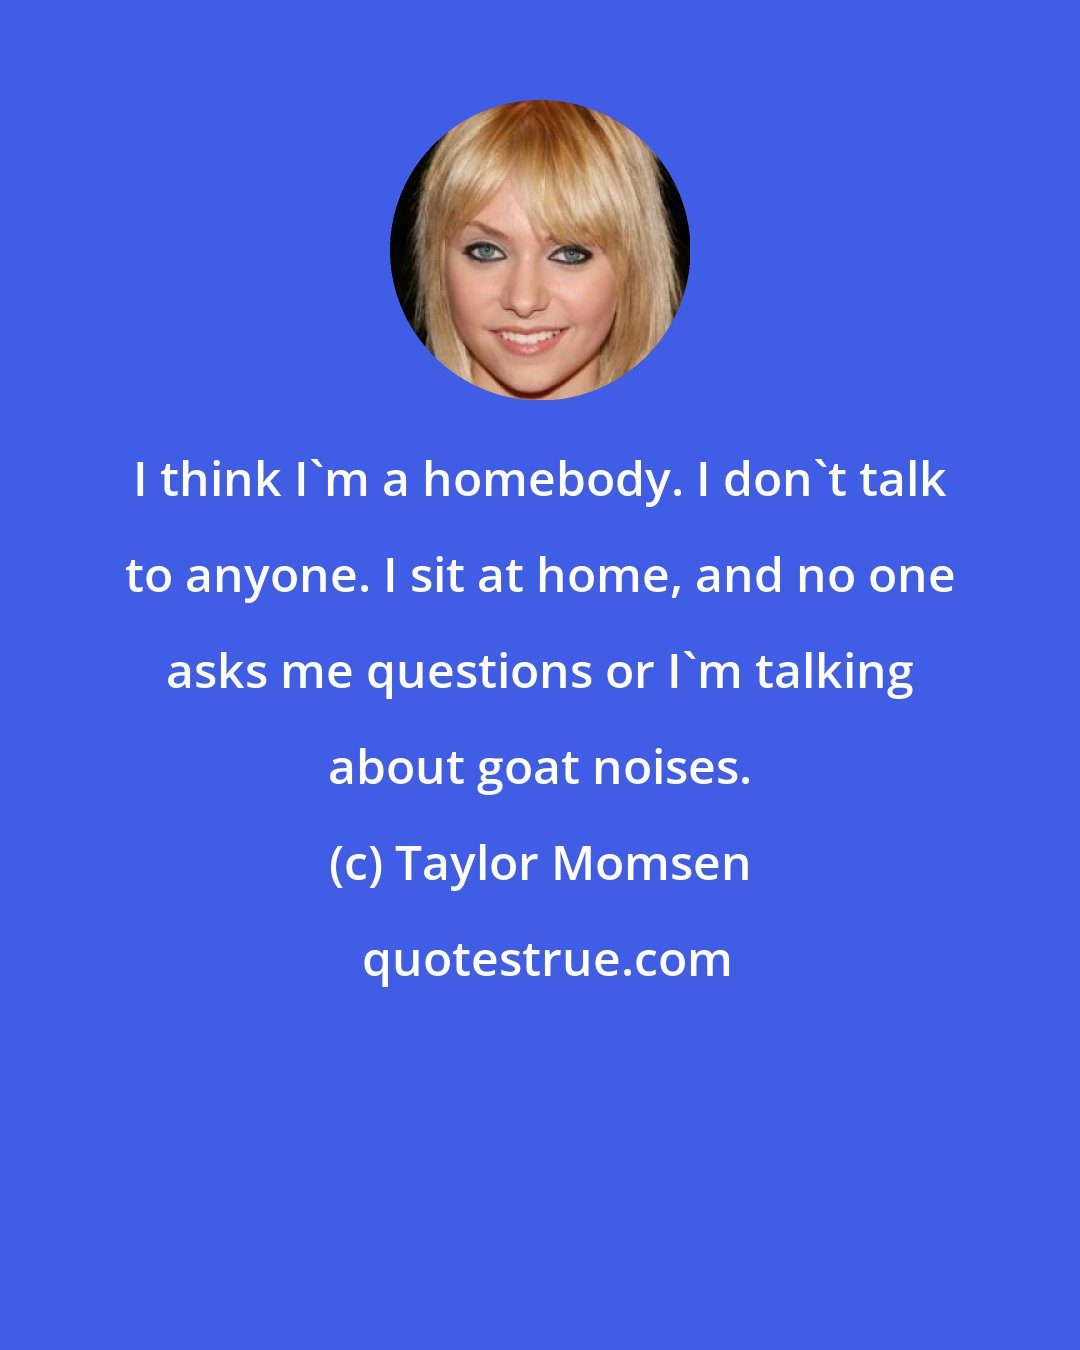 Taylor Momsen: I think I'm a homebody. I don't talk to anyone. I sit at home, and no one asks me questions or I'm talking about goat noises.